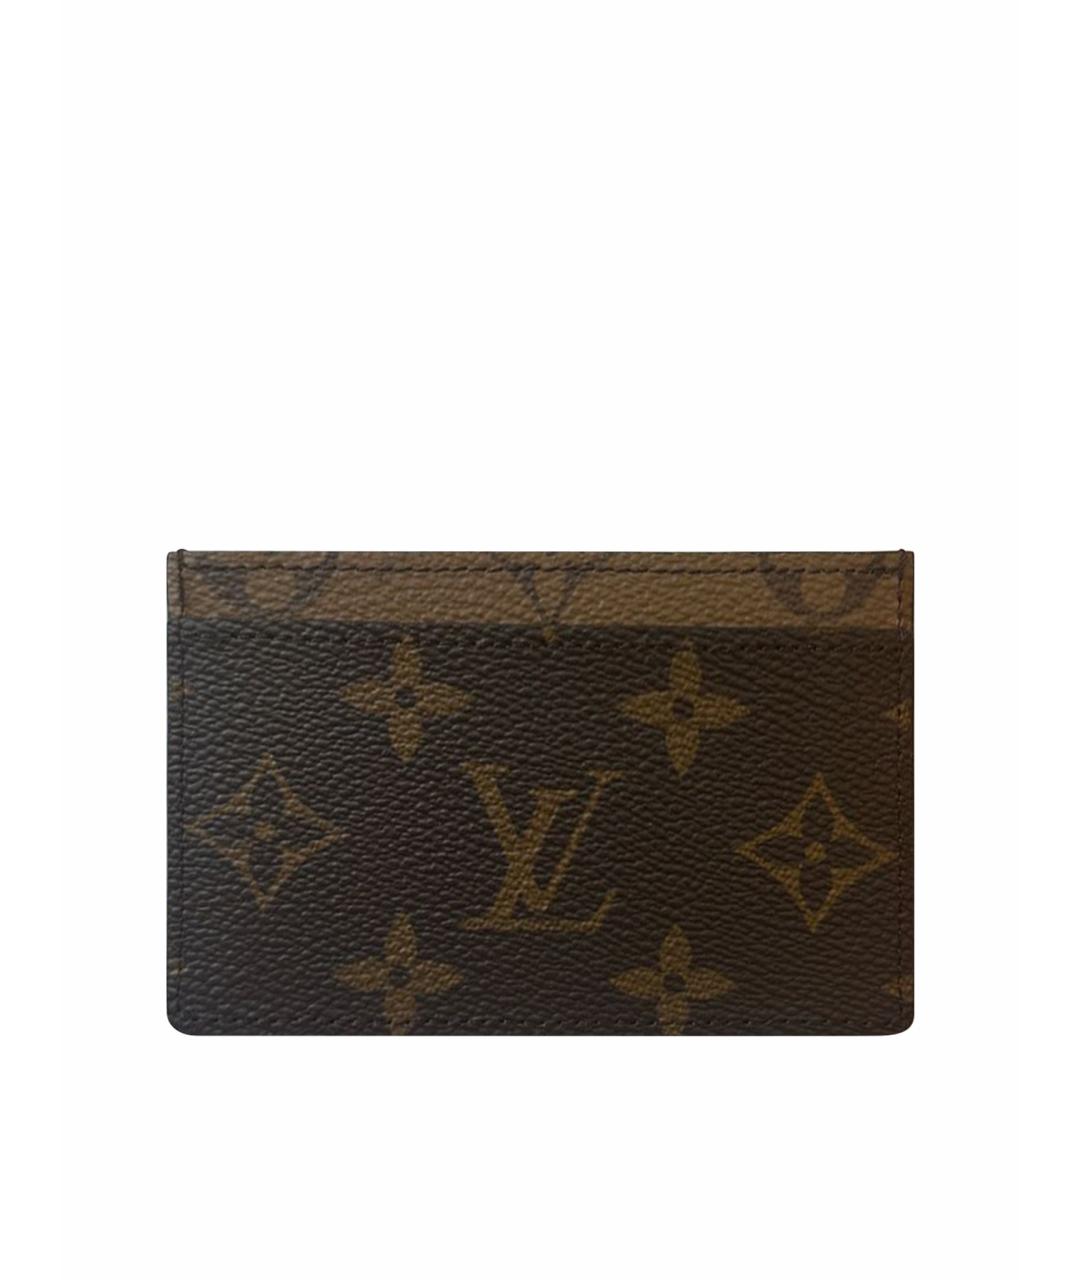 LOUIS VUITTON PRE-OWNED Коричневый кардхолдер, фото 1